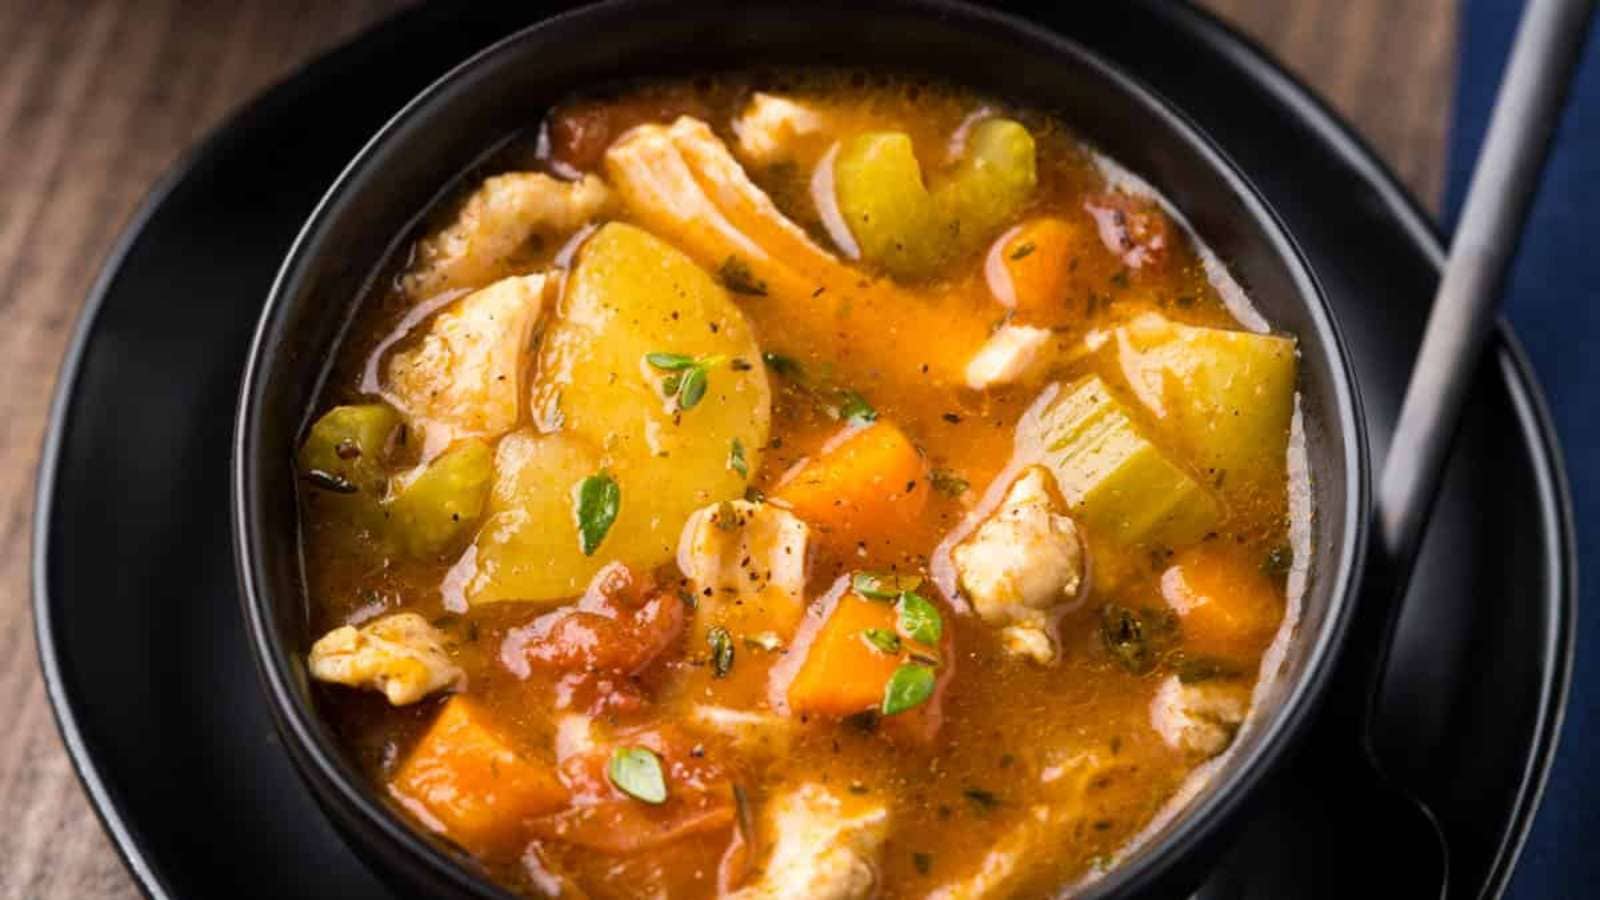 A bowl of stew made with chicken.